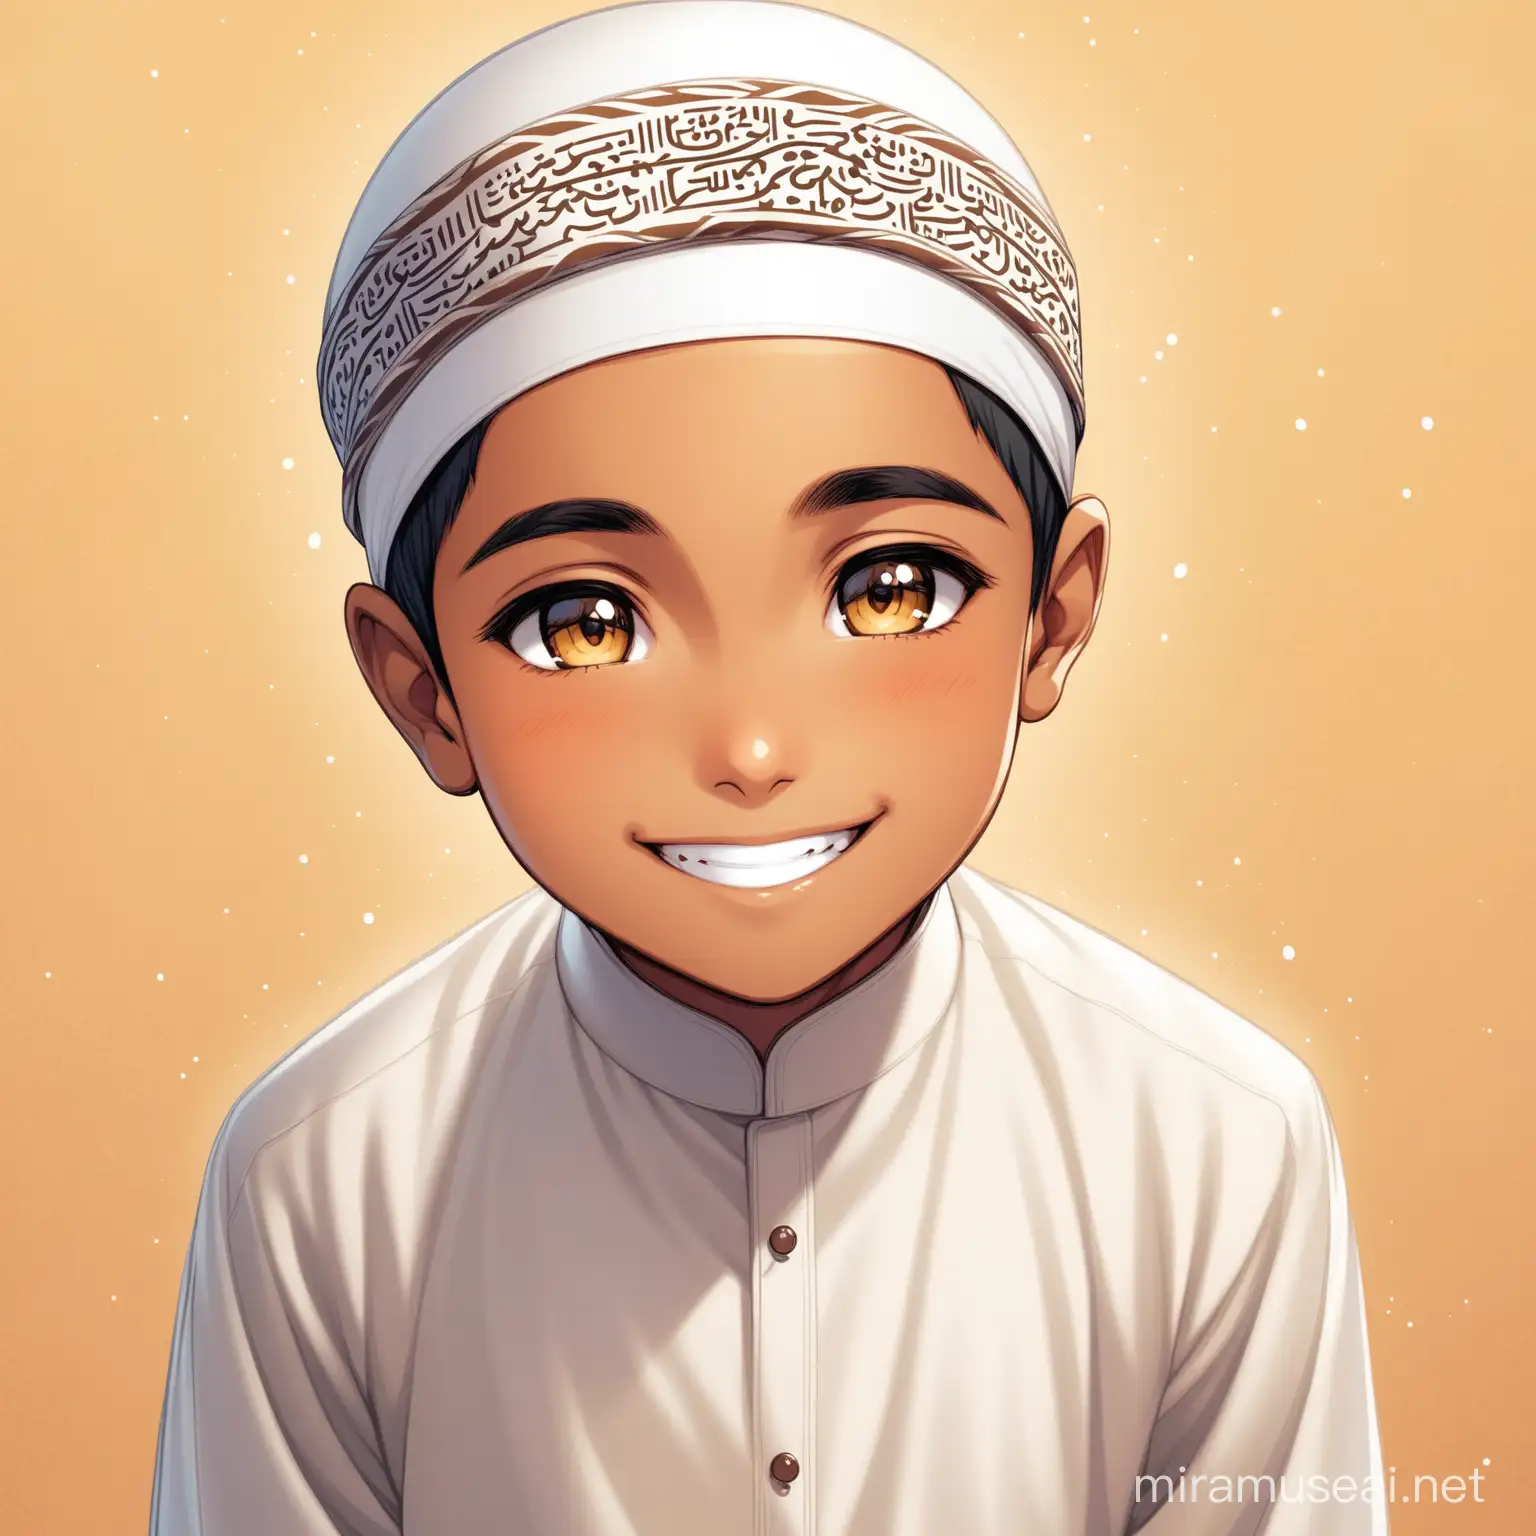 Muslim boy with smile